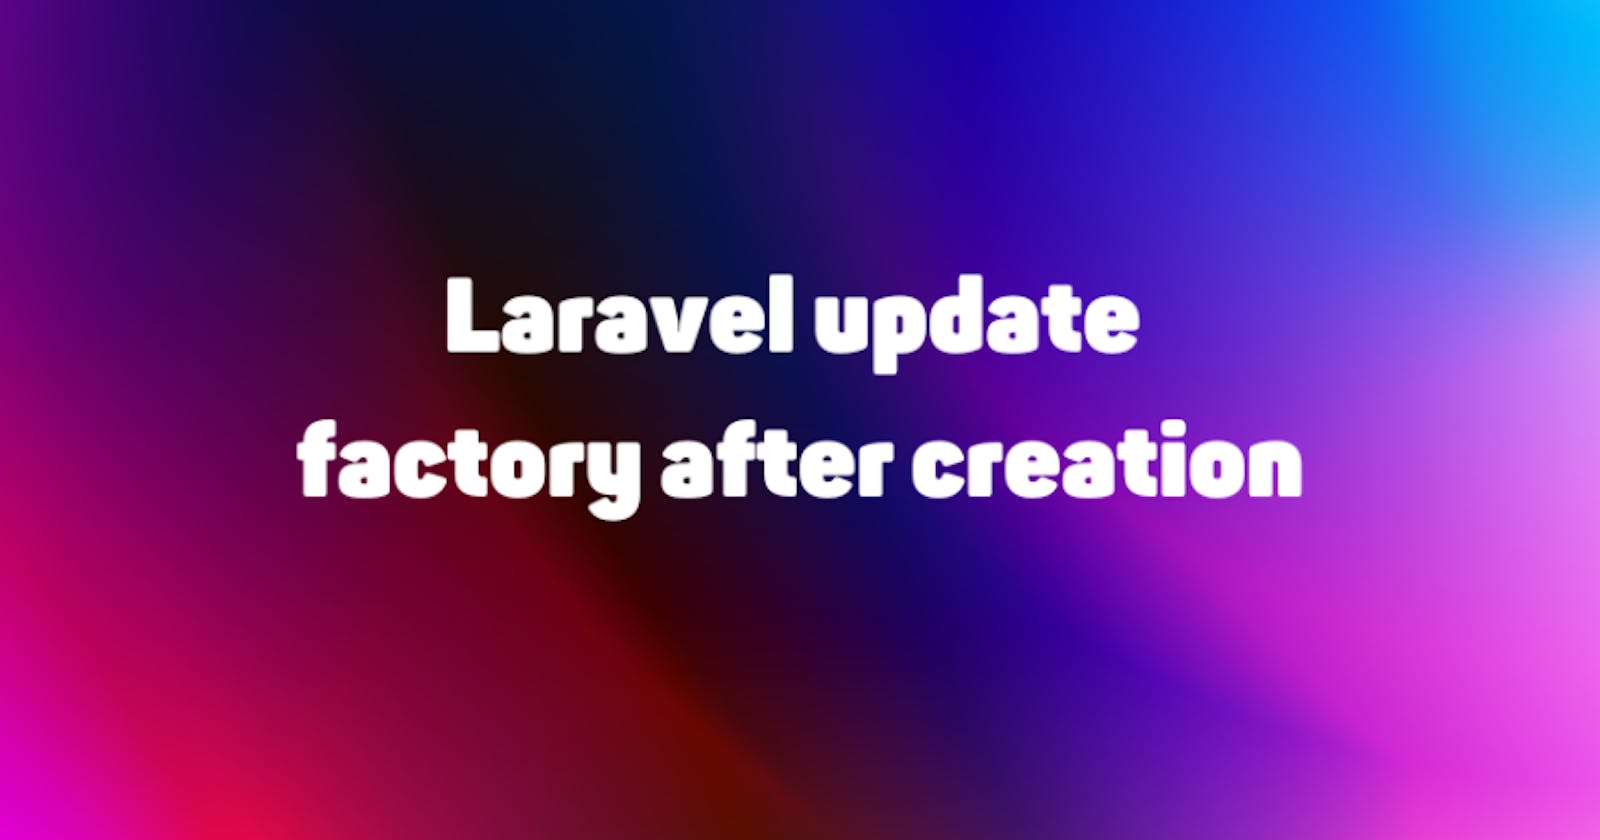 Laravel update factory after creation